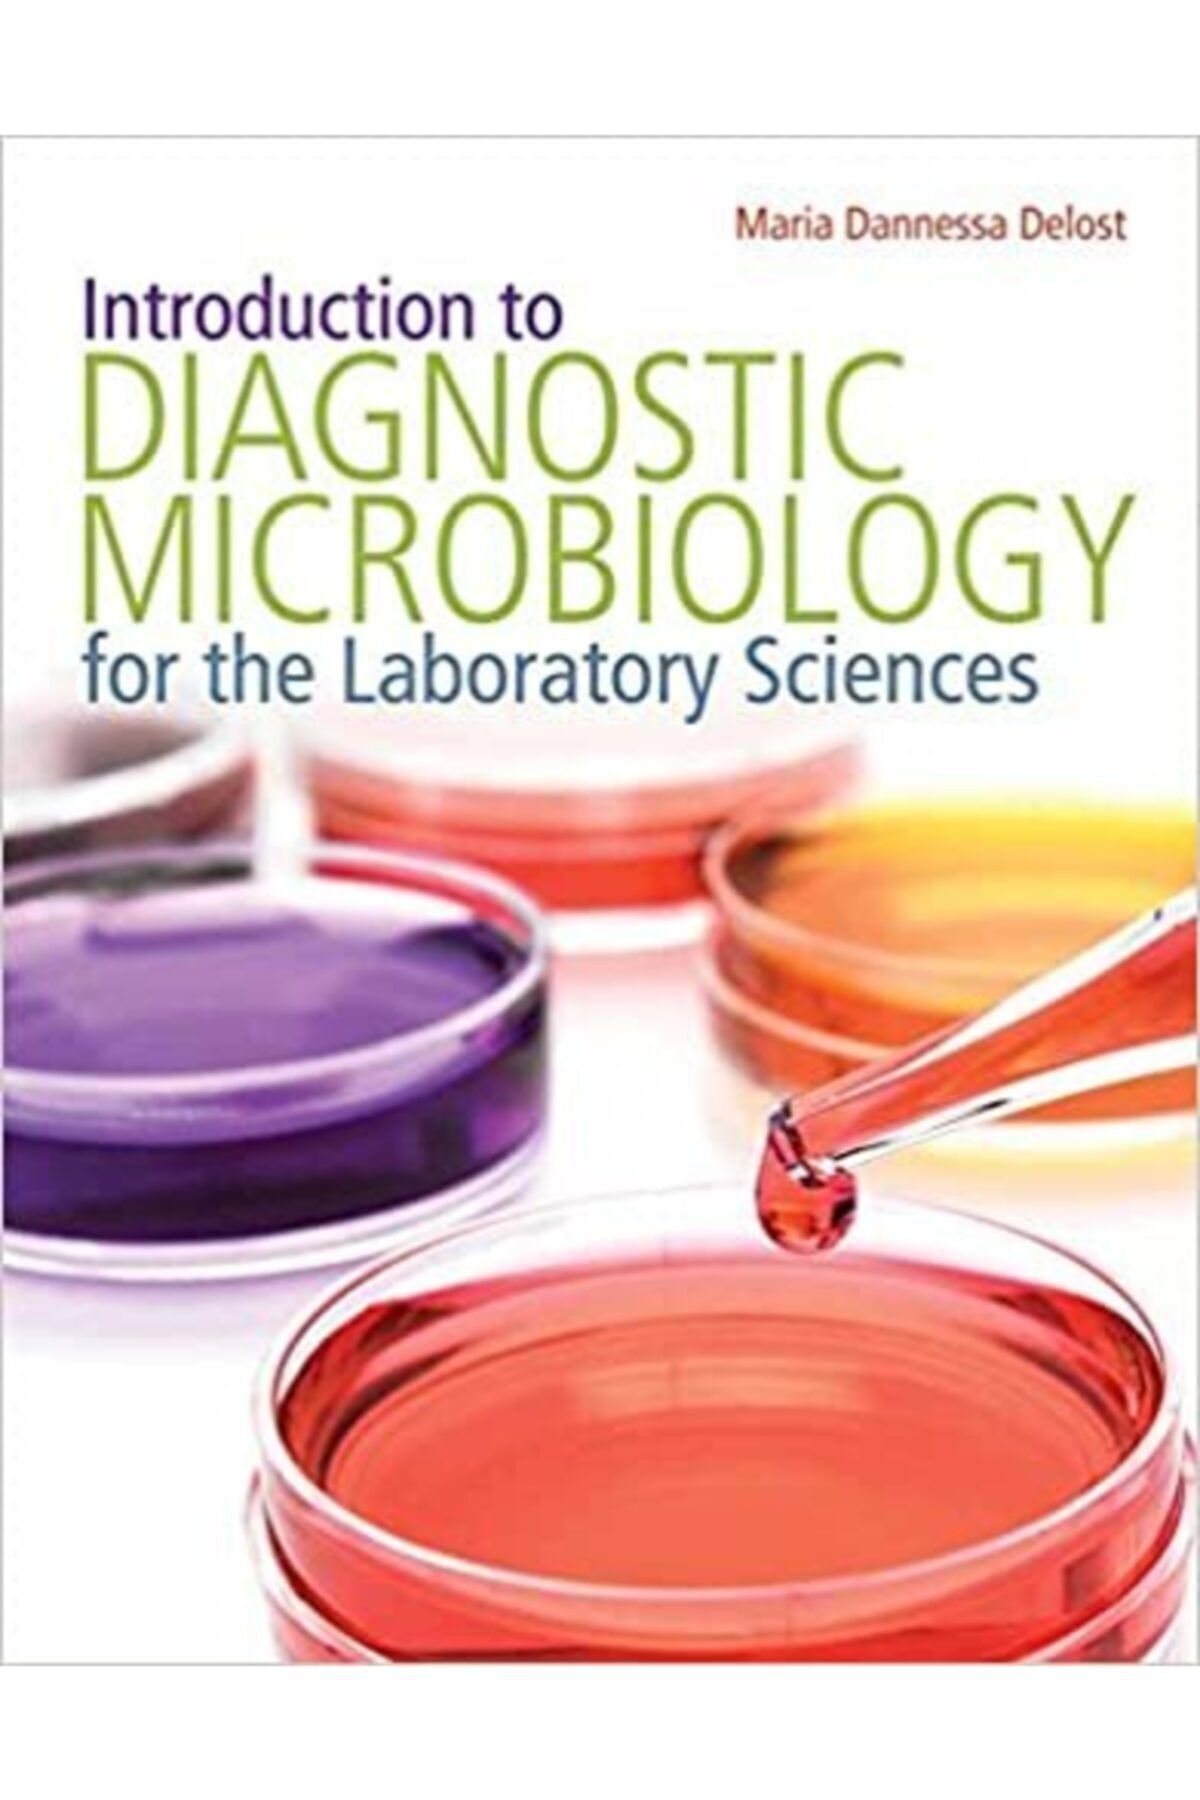 Ema Tıp Kitabevi Introduction To Diagnostic Microbiology For The Laboratory Sciences (English) 1st Edition